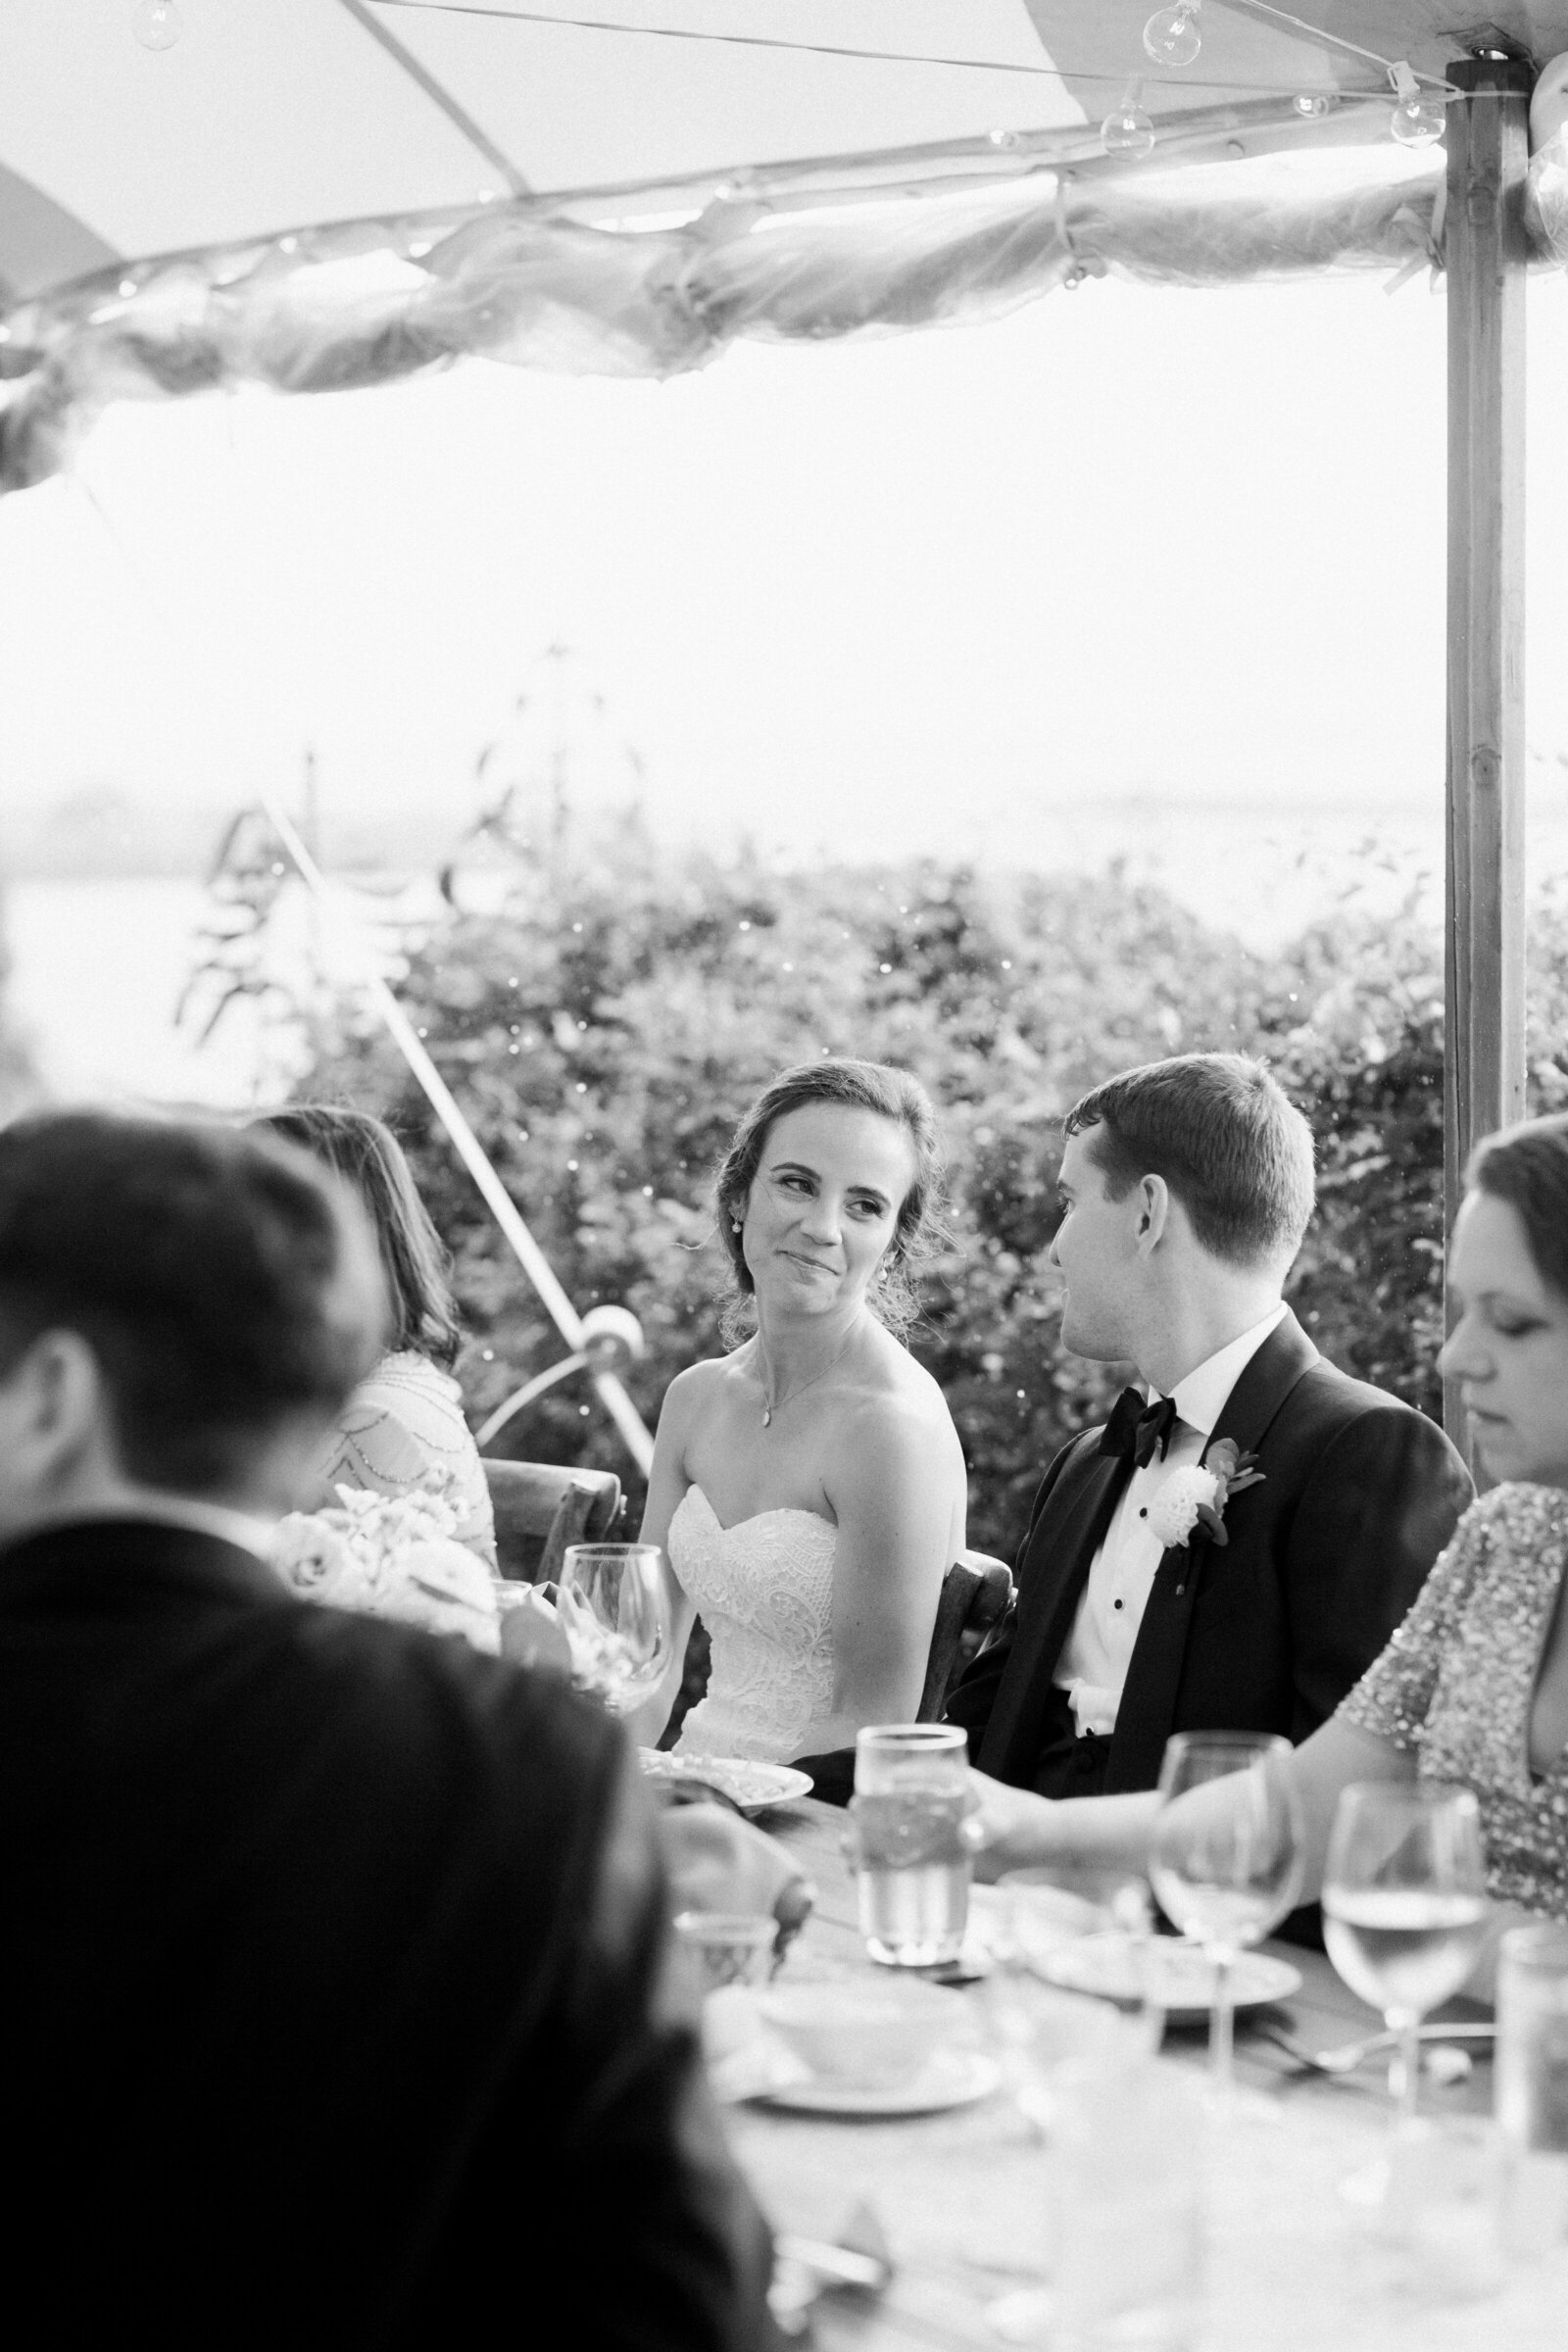 Black and white photo of a couple sitting at a table at their wedding reception with their guests.